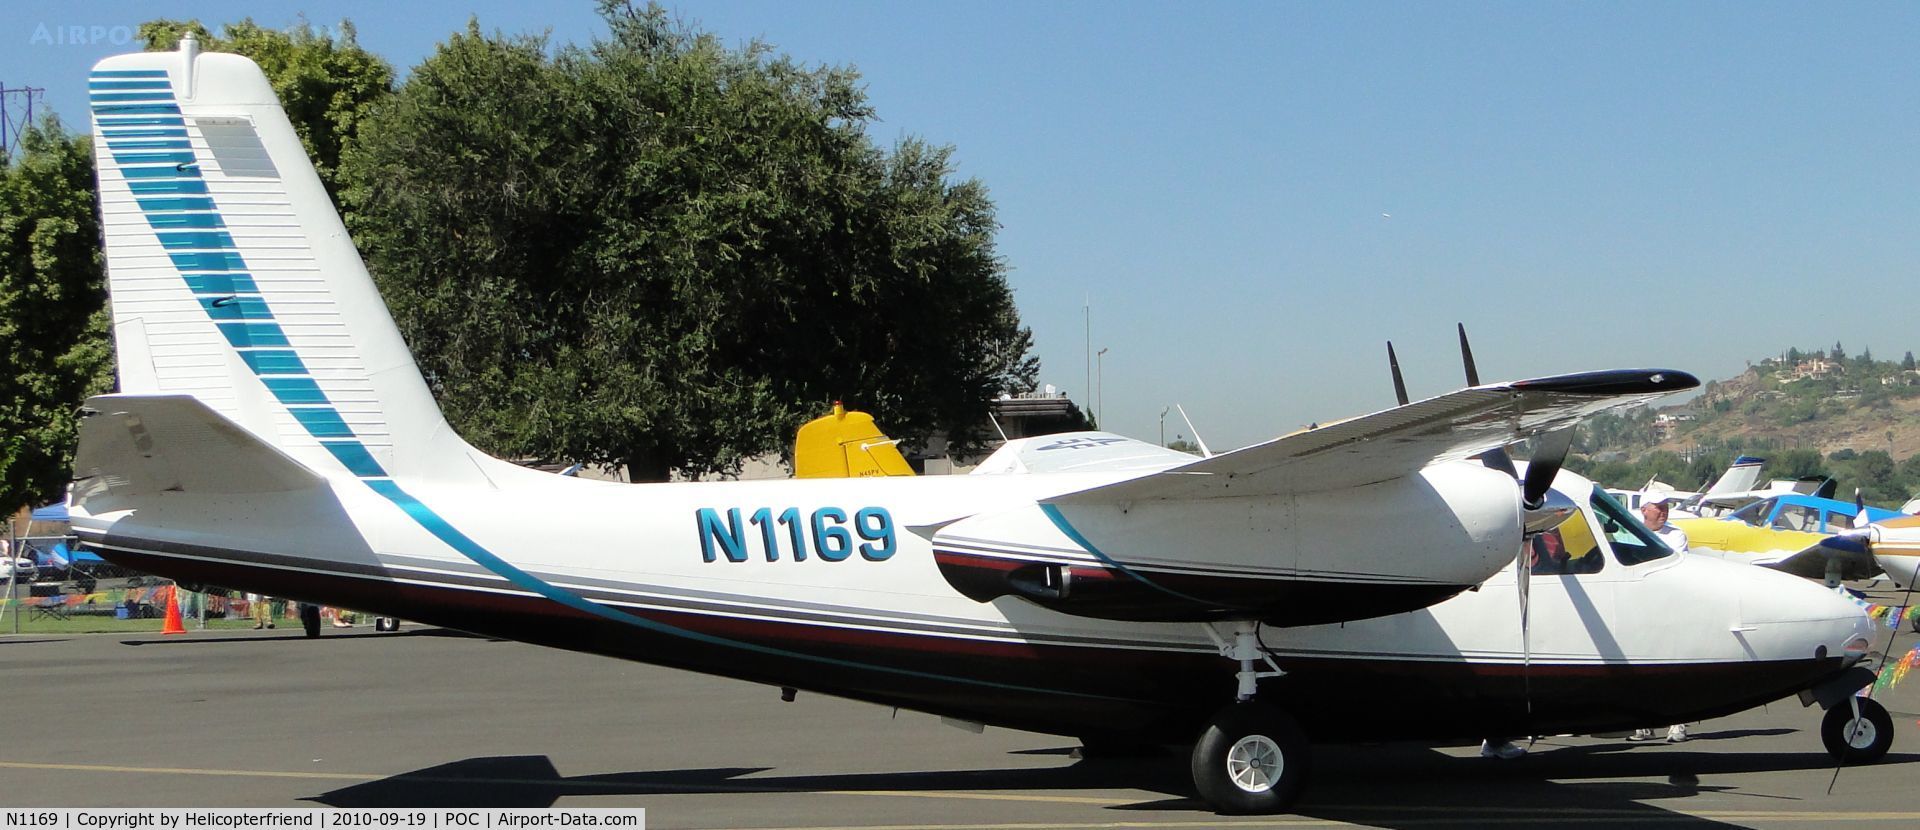 N1169, 1956 Aero Commander 560-A C/N 390, Parked for display